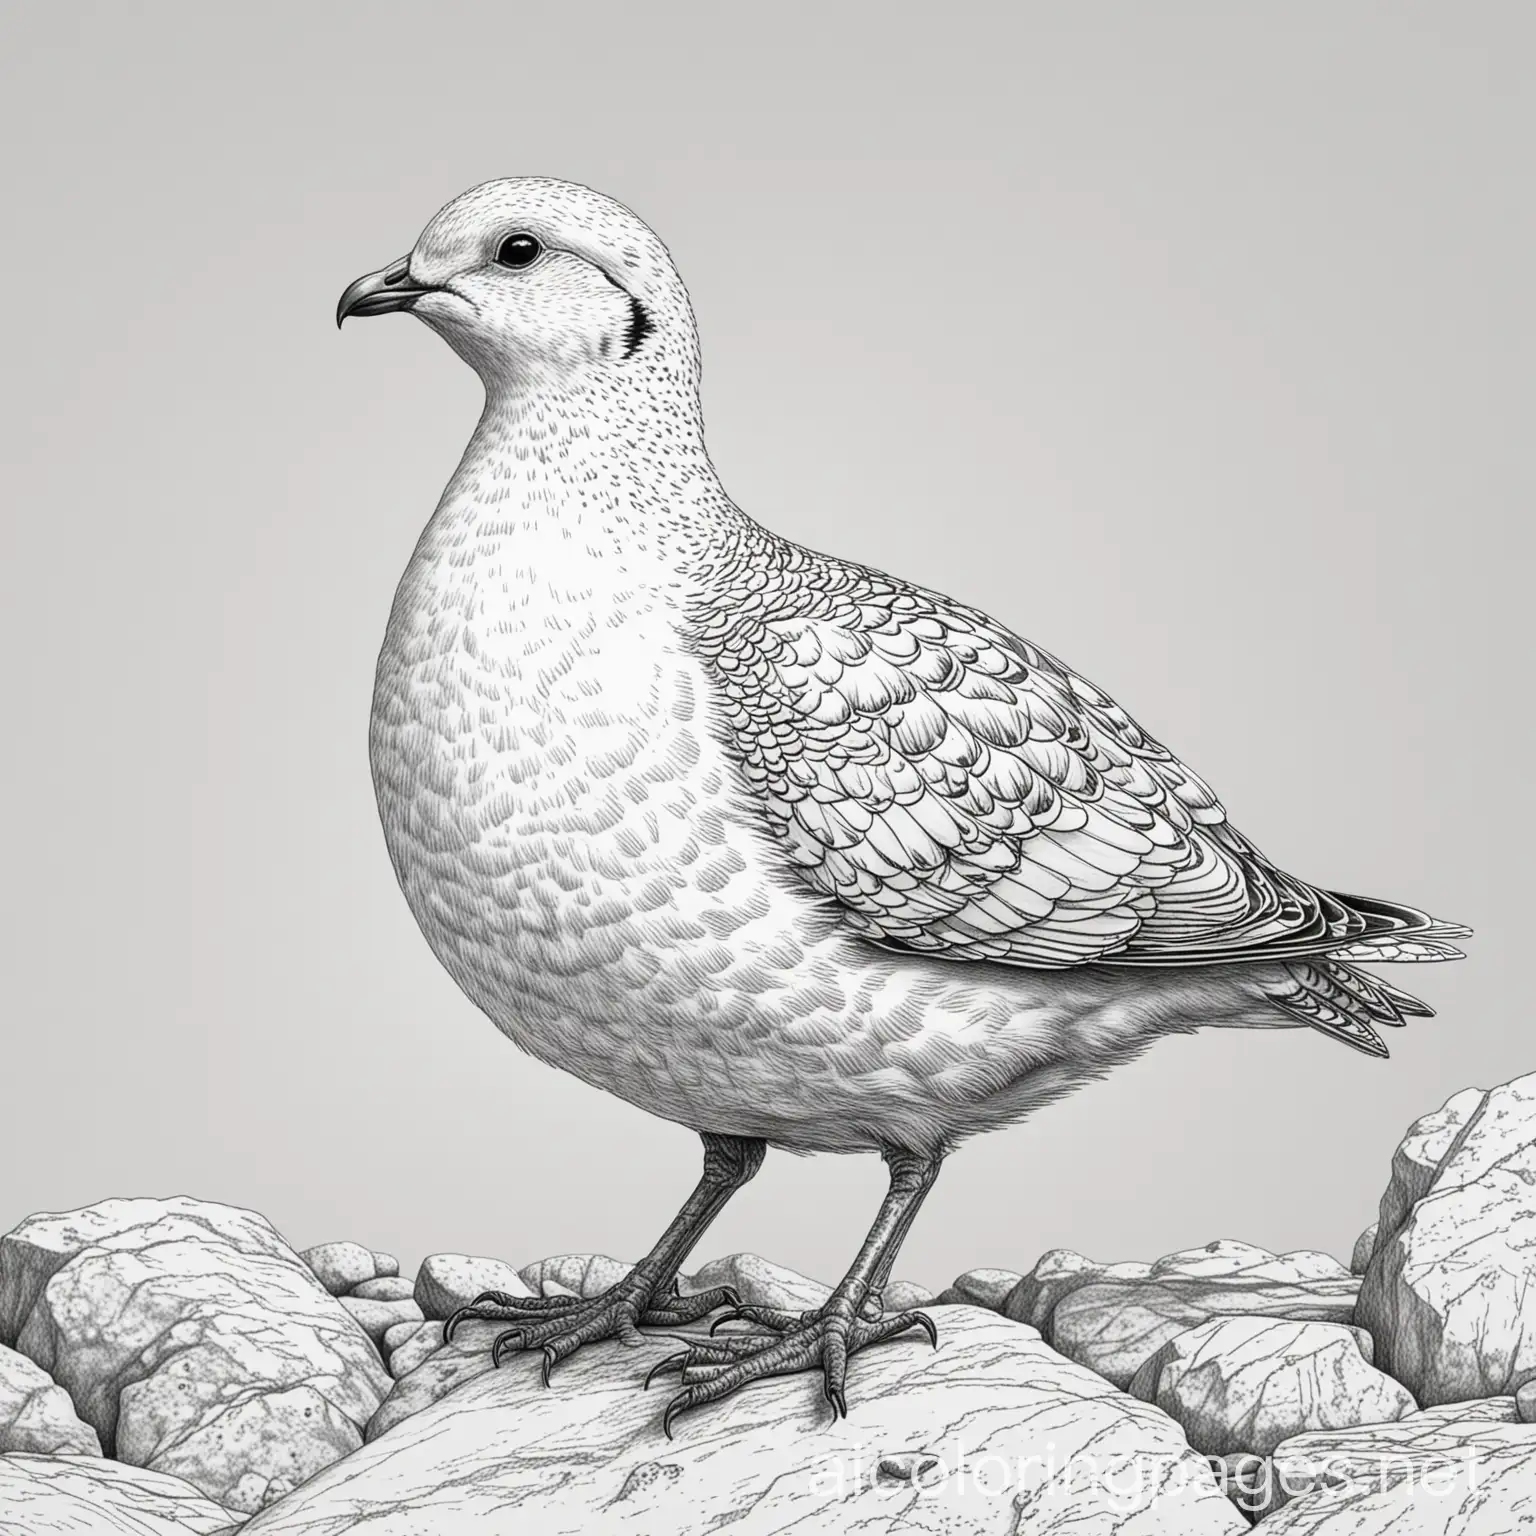  rock ptarmigan


, black and white, fine lines, no shading, no colour, Coloring Page, black and white, line art, white background, Simplicity, Ample White Space. The background of the coloring page is plain white to make it easy for young children to color within the lines. The outlines of all the subjects are easy to distinguish, making it simple for kids to color without too much difficulty